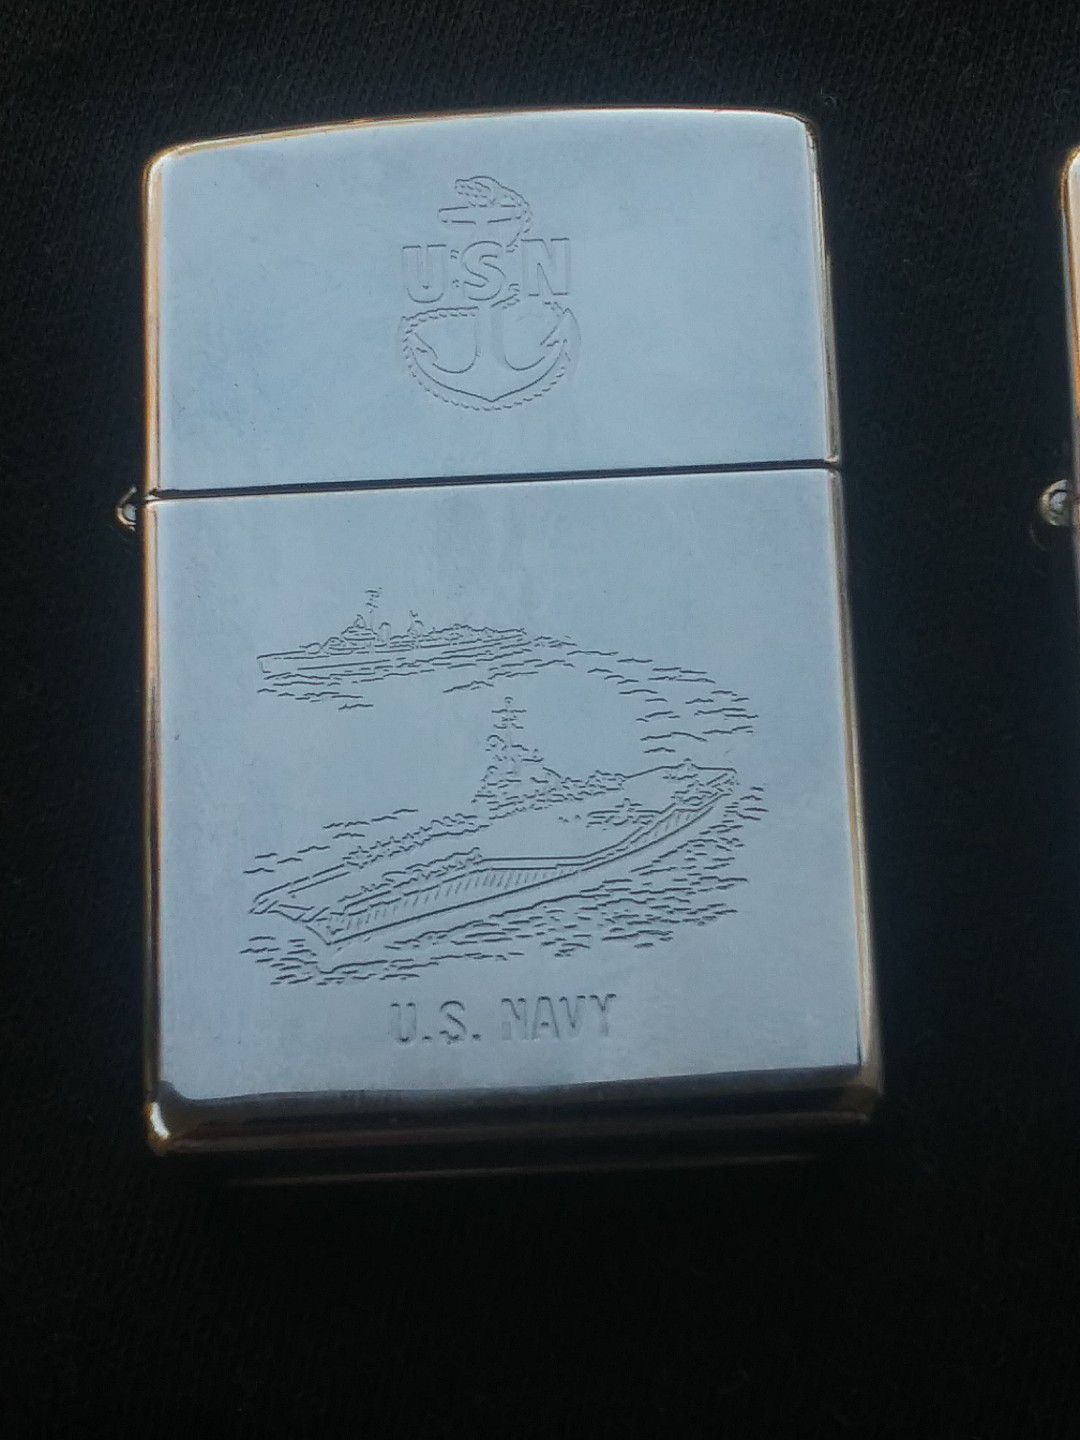 US navy Zippo sealed the other lighters are not reflective in this price they are other zippos and Park lighters